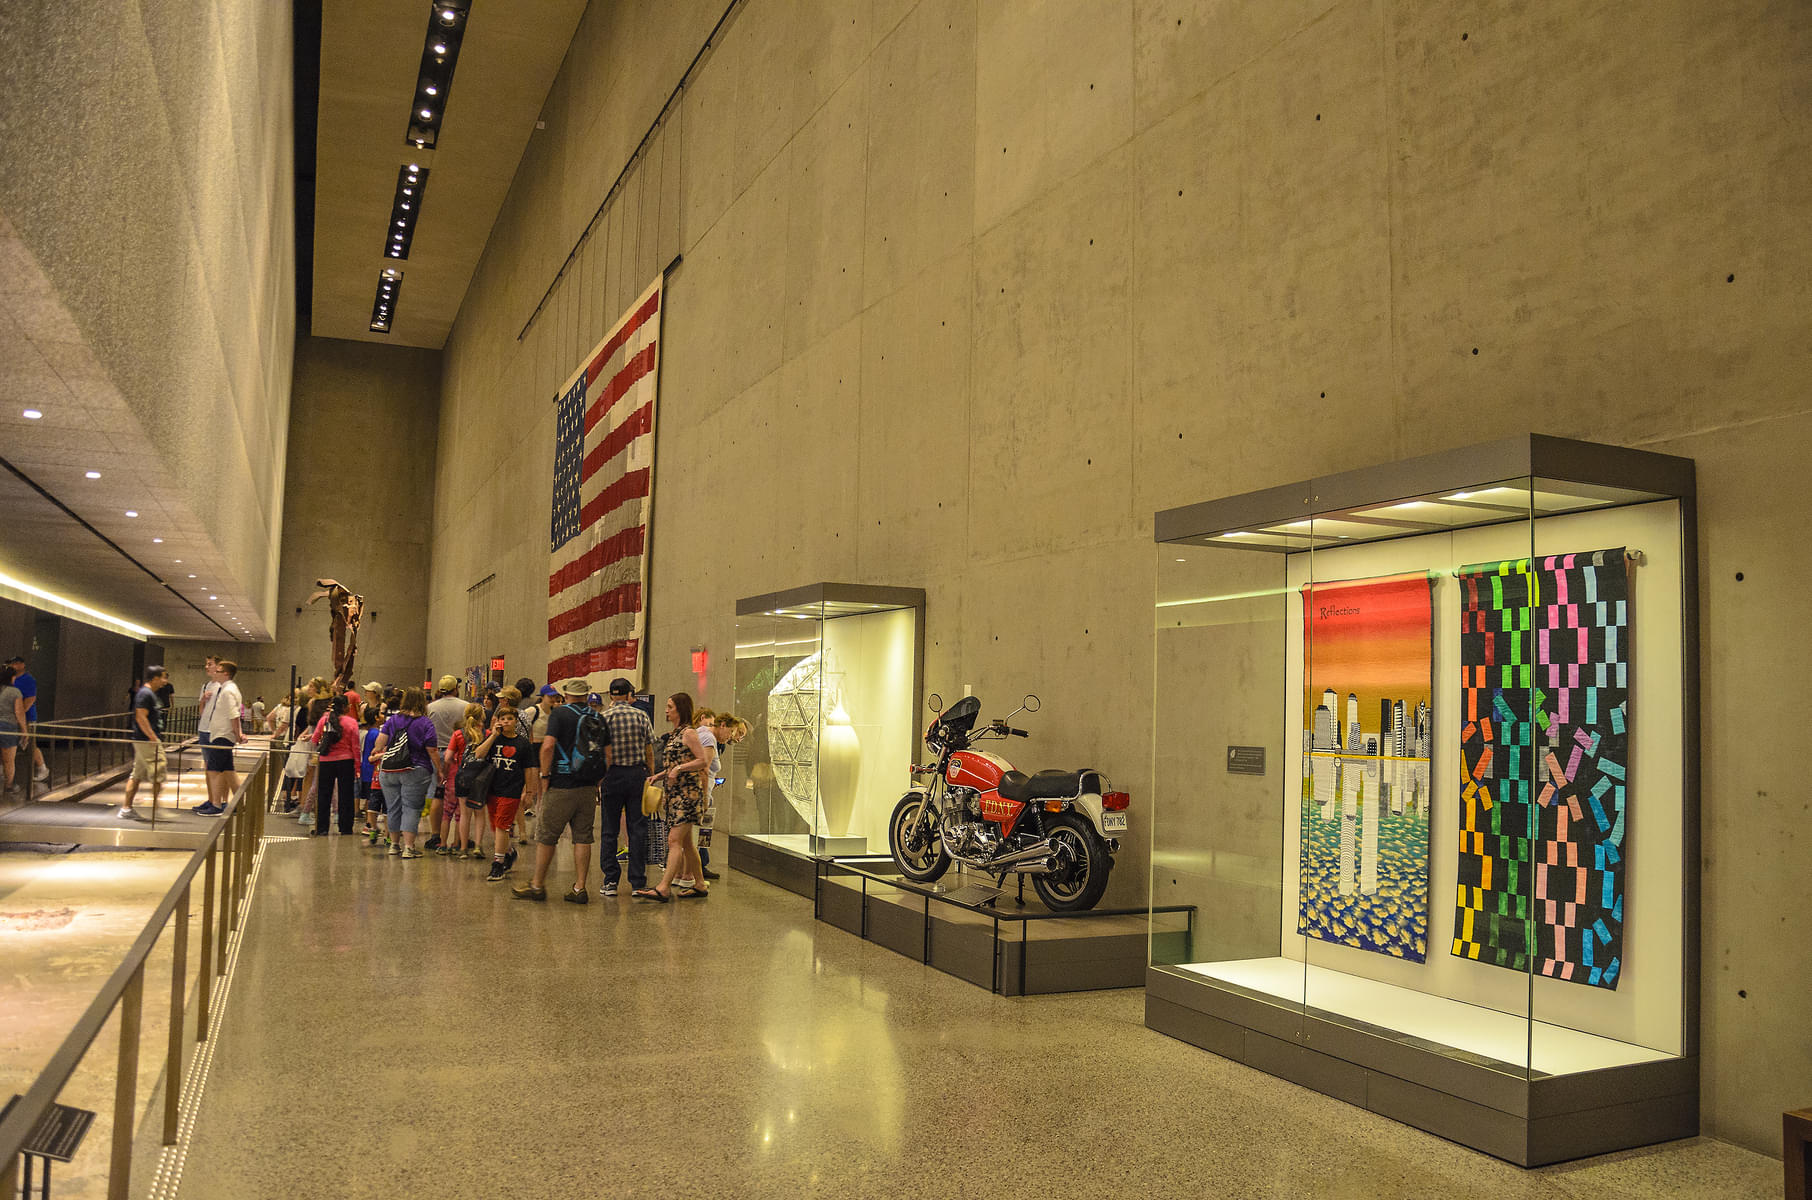 Accessibility at the 9/11 Museum